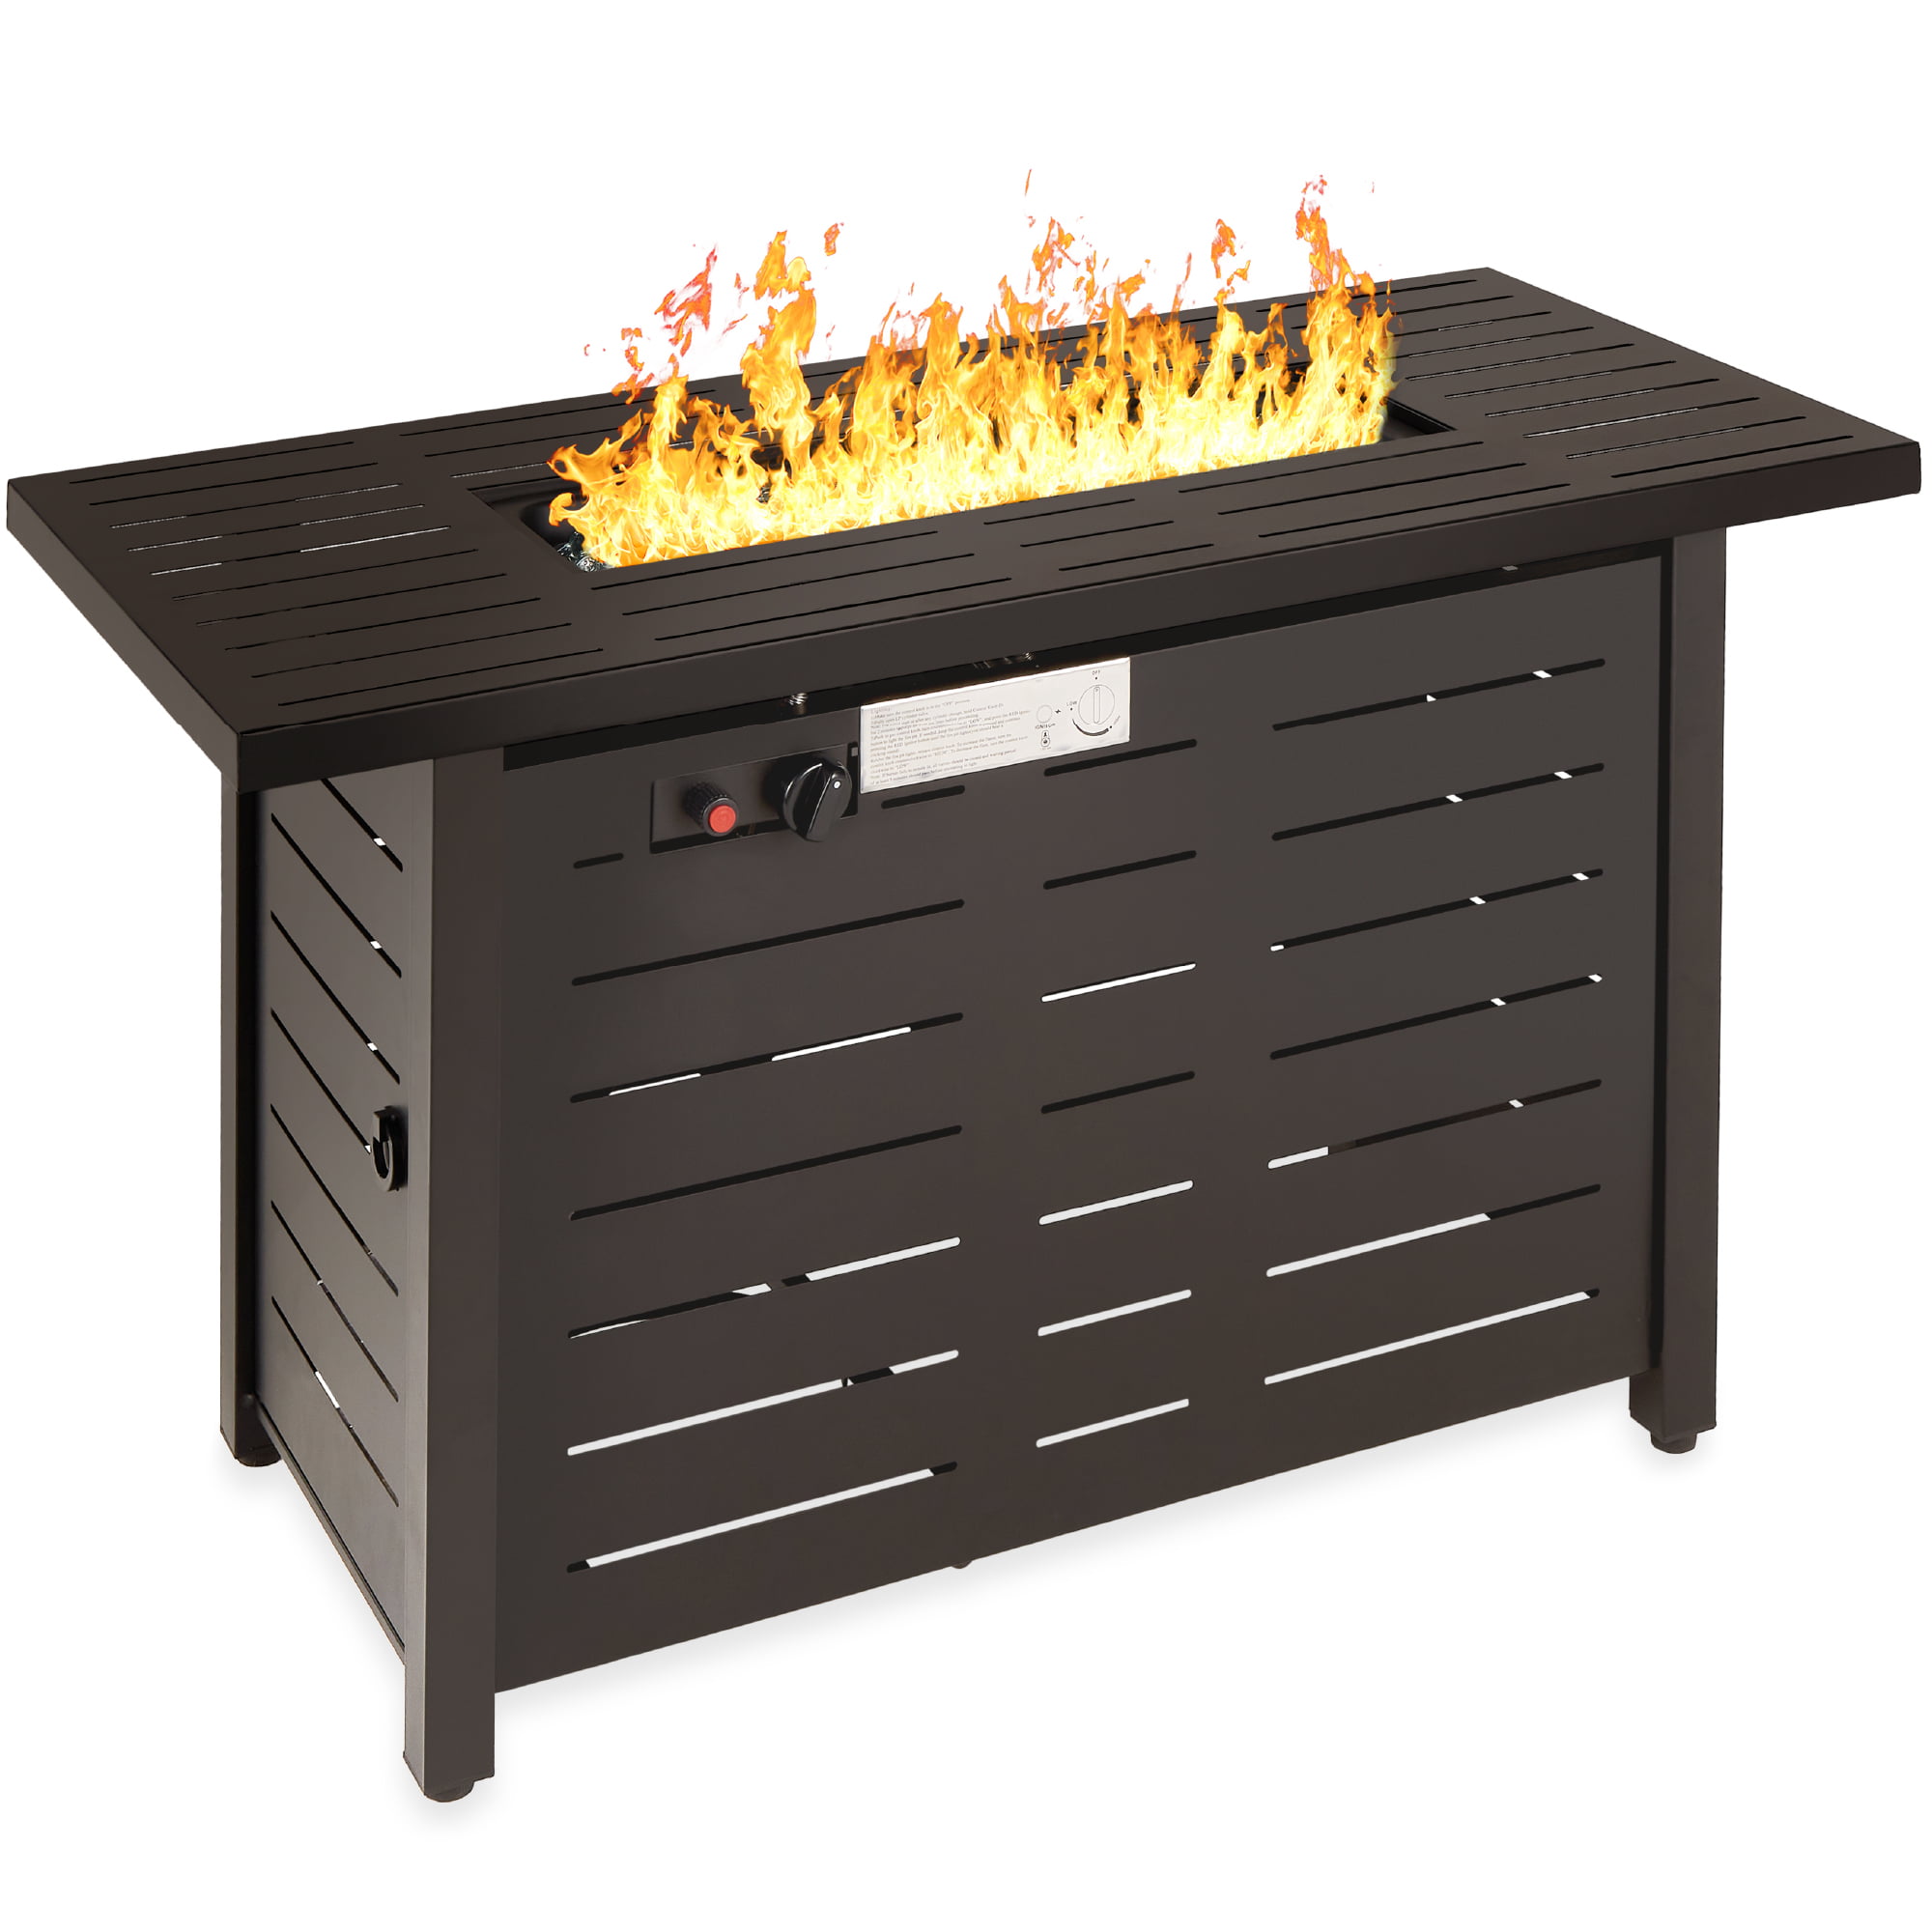 Fire Pit Table, Coleman Propane Fire Pit Table